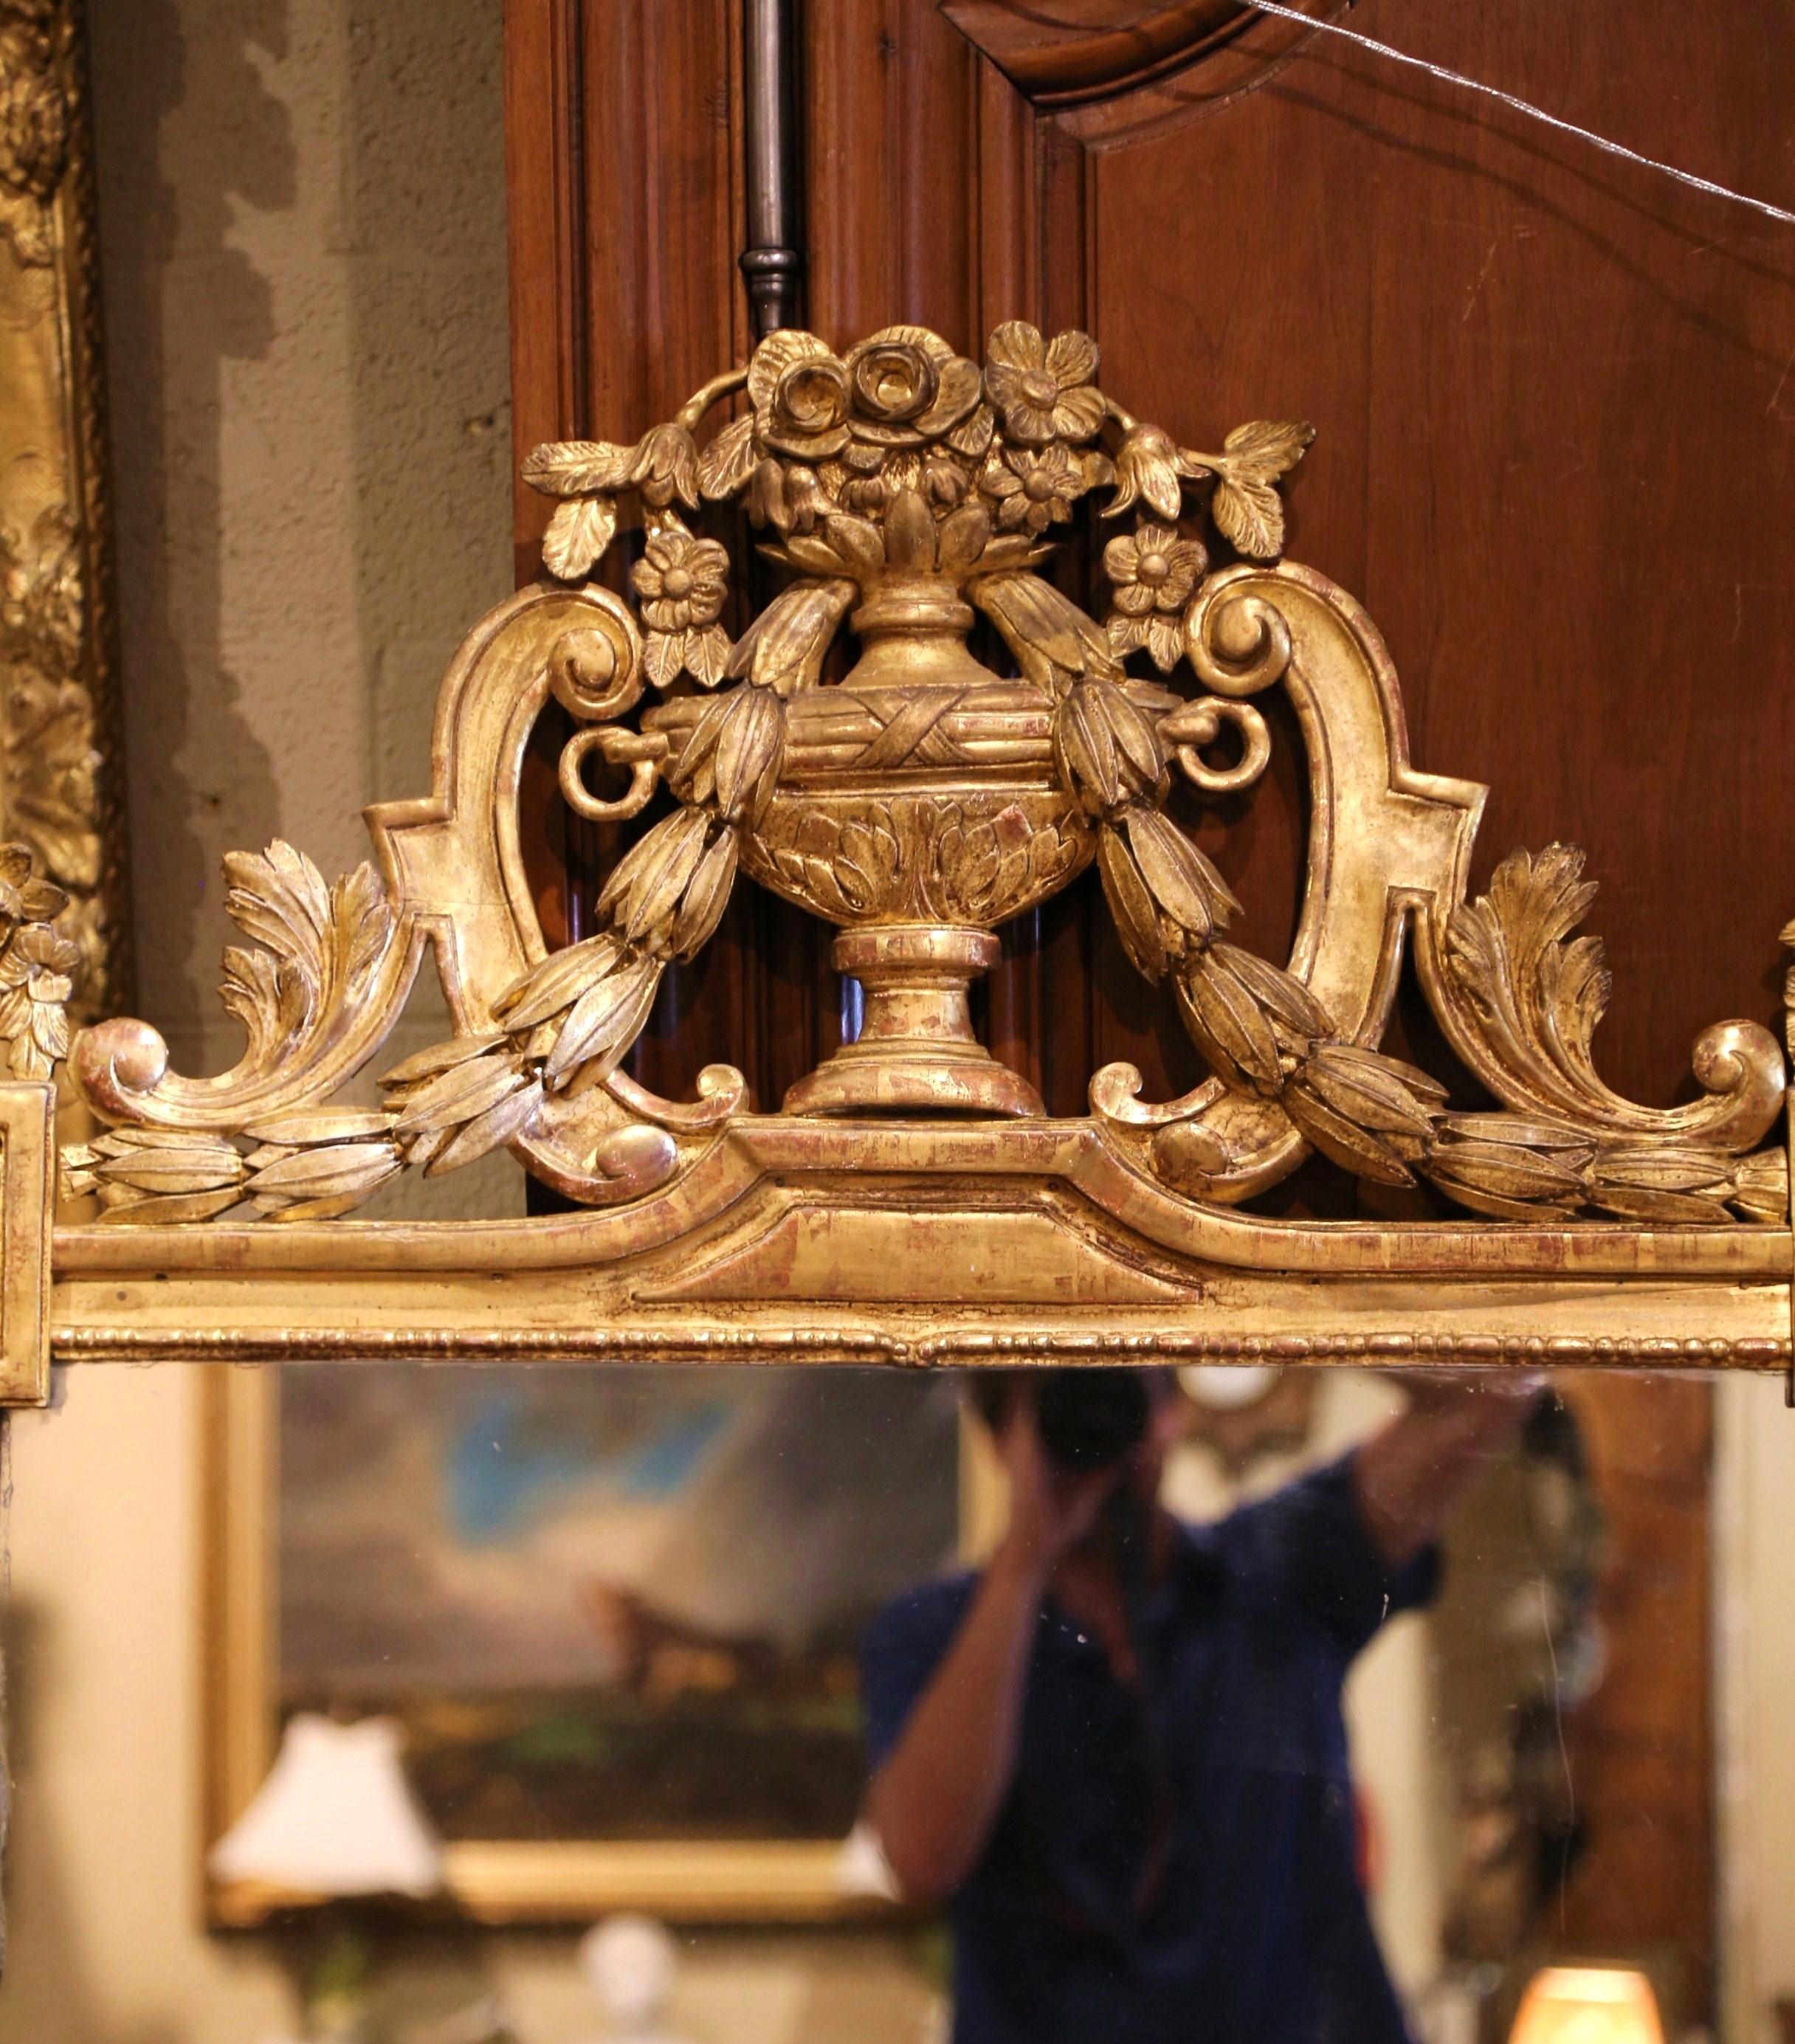 French 18th Century Louis XVI Carved Gilt Wood Mirror with Floral Vase and Swag Motifs